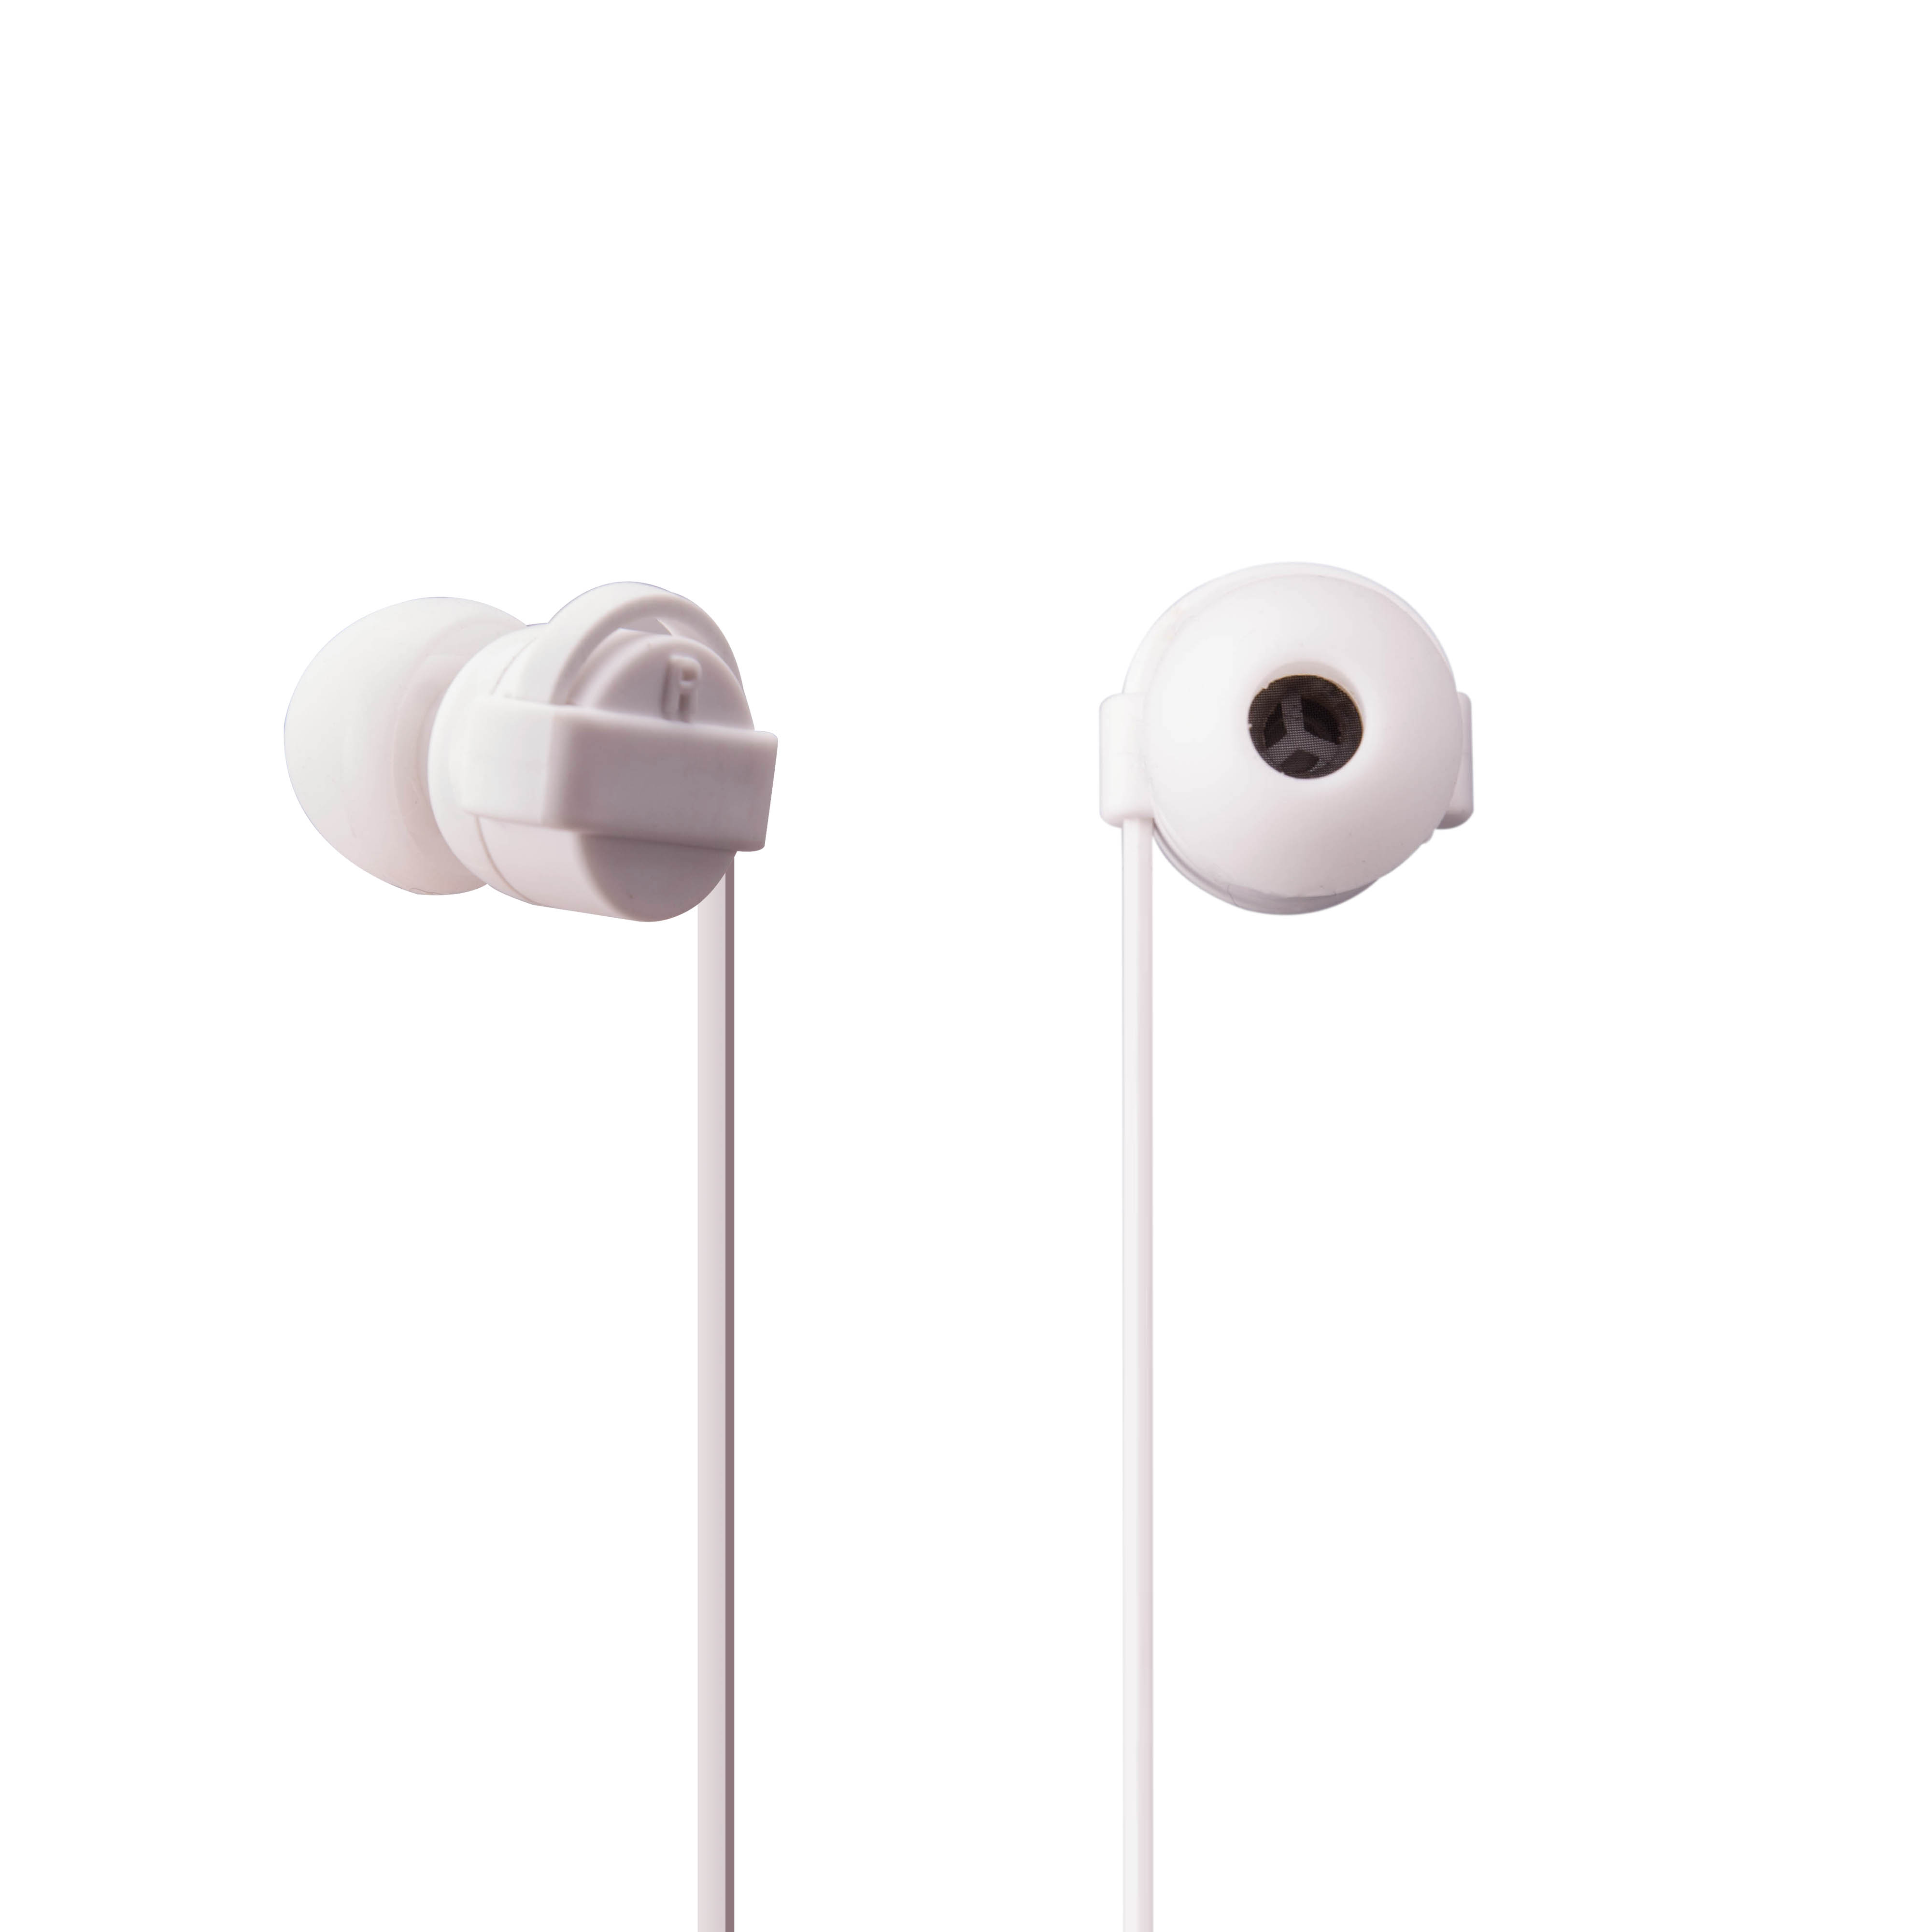 OEM-E166A White color plastice new earbuds